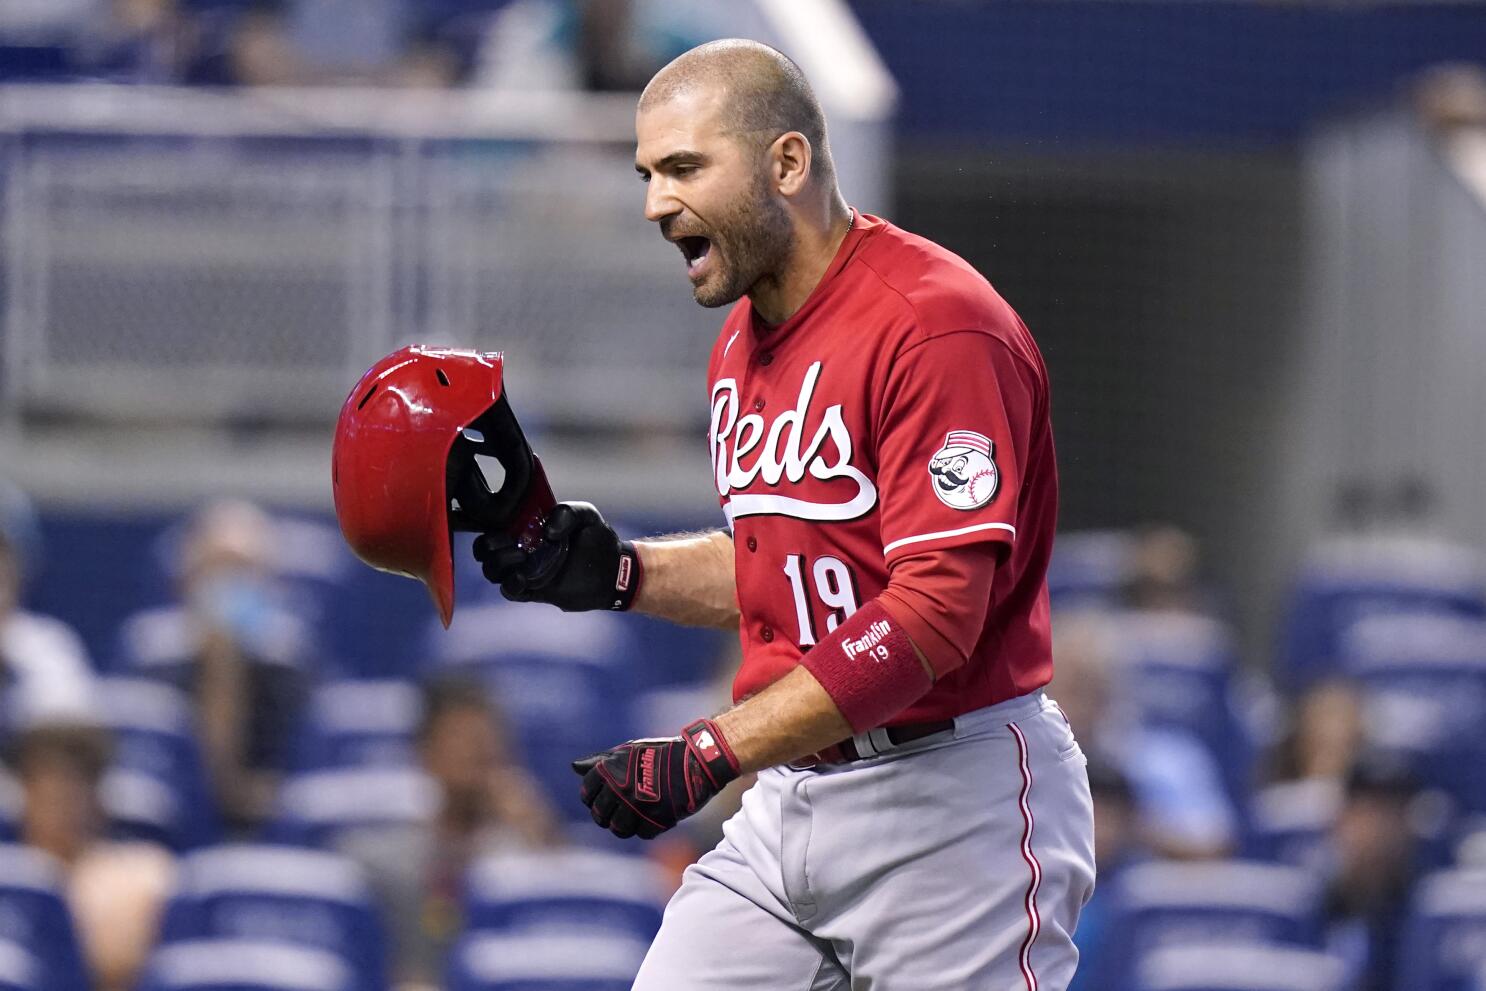 Votto ejected after 1st inning of what may be final game with Reds, National Sports